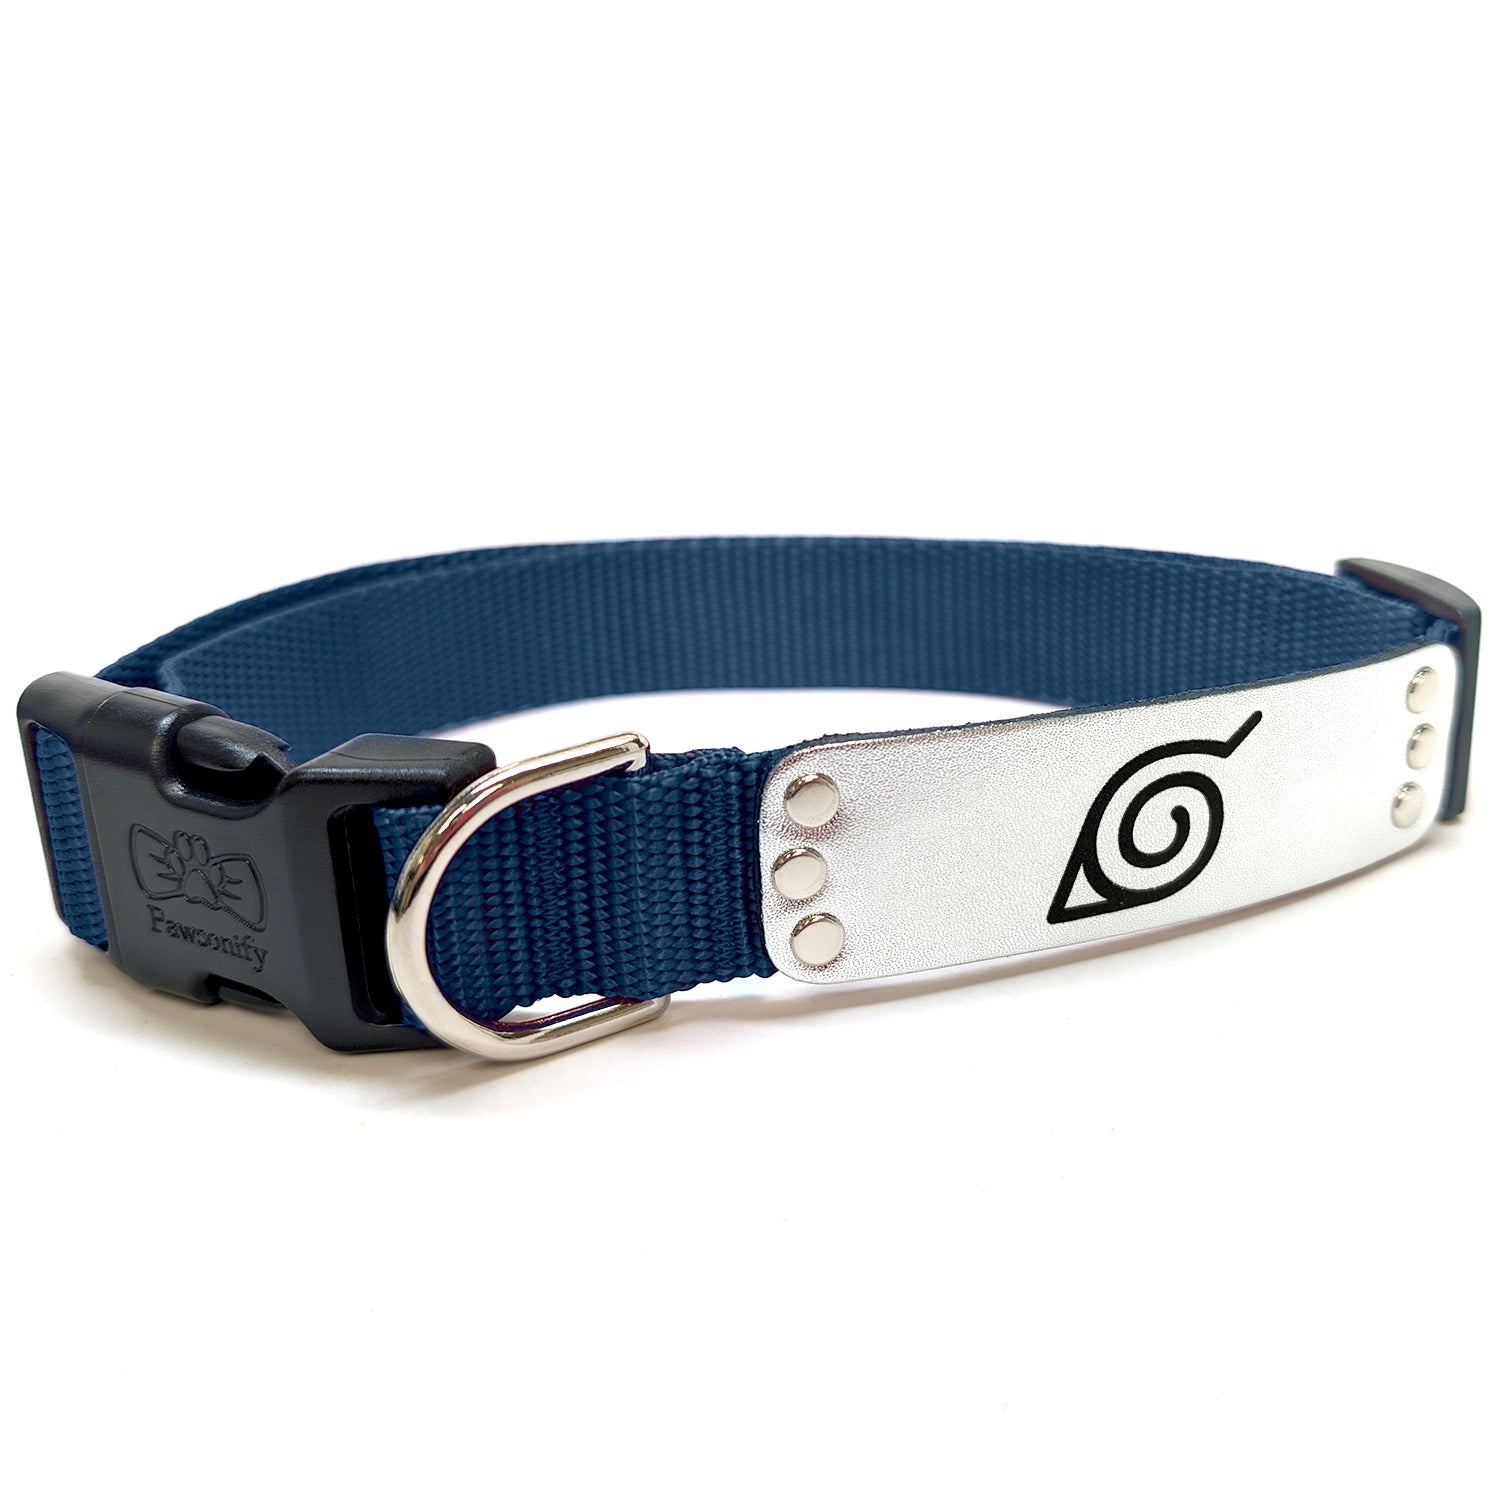 Naruto Shippuden x Pawsonify - Officially Licensed Ninja Collar (Navy) for Large Dogs #size_Dog: (L) 18-26